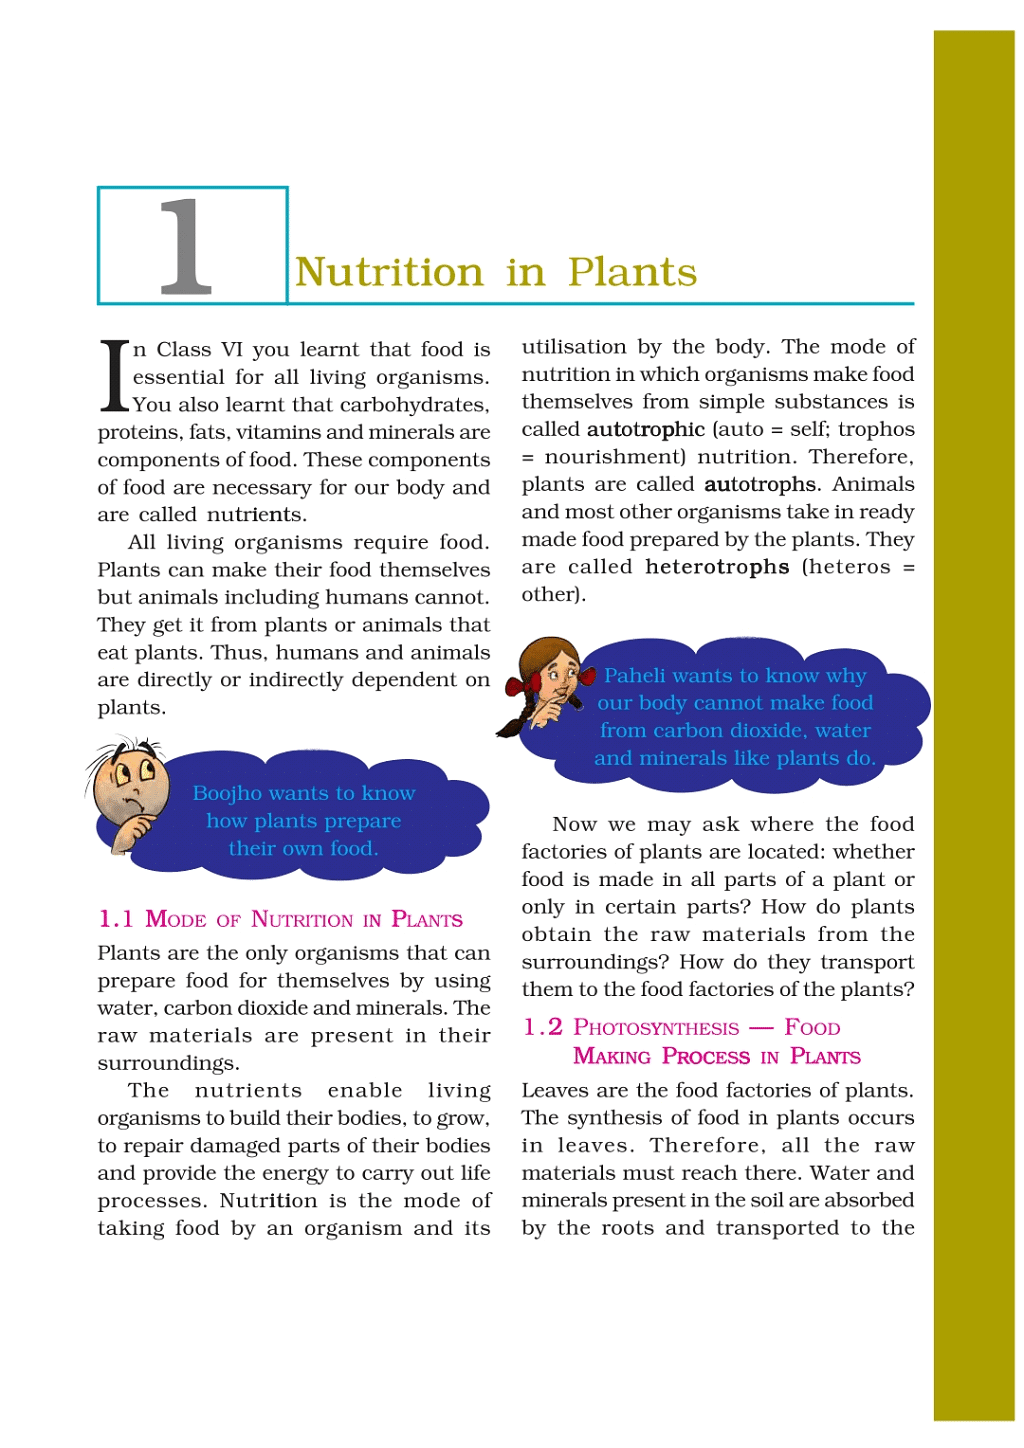 Nutrition in Plants. - Notes - Class 7